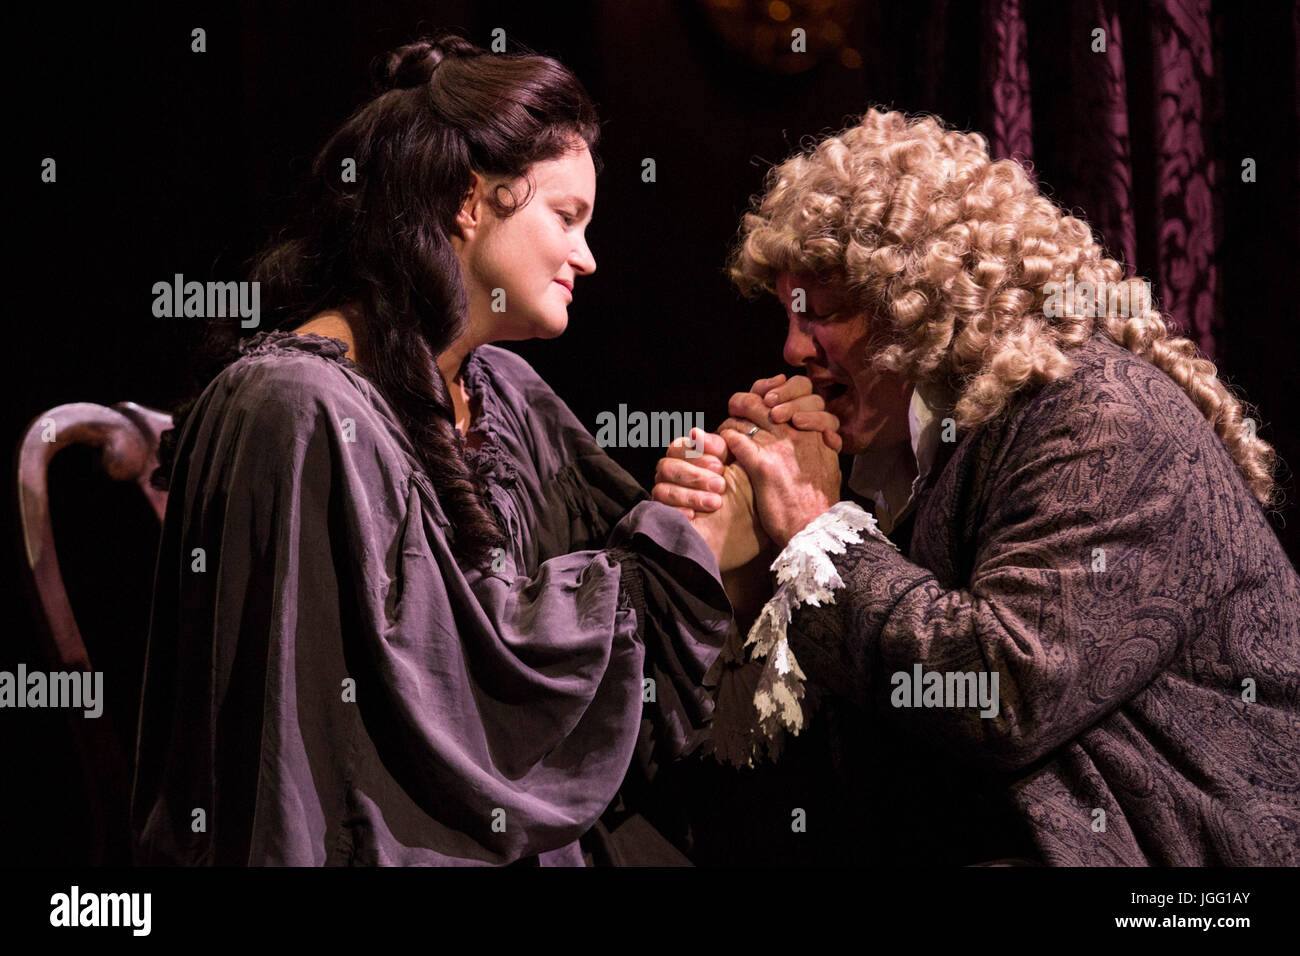 London, UK. 6th July, 2017. L-R: Emma Cunniffe (Queen Anne/Princess Anne) and Hywel Morgan (Prince George of Denmark). After a sold out run at the Swan Theatre in Stratford-upon-Avon in 2015-16, the Royal Shakespeare Company production of Queen Anne transfers to the Theatre Royal Haymarket from 30 June for a thirteen week limited run until 30 September 2017. Queen Anne is a new play written by Helen Edmundson and directed by Natalie Abrahami. With Emma Cunniffe as Queen Anne/Princess Anne, Romola Garai as Sarah Churchill/Duchess of Marlborough. Credit: Bettina Strenske/Alamy Live News Stock Photo